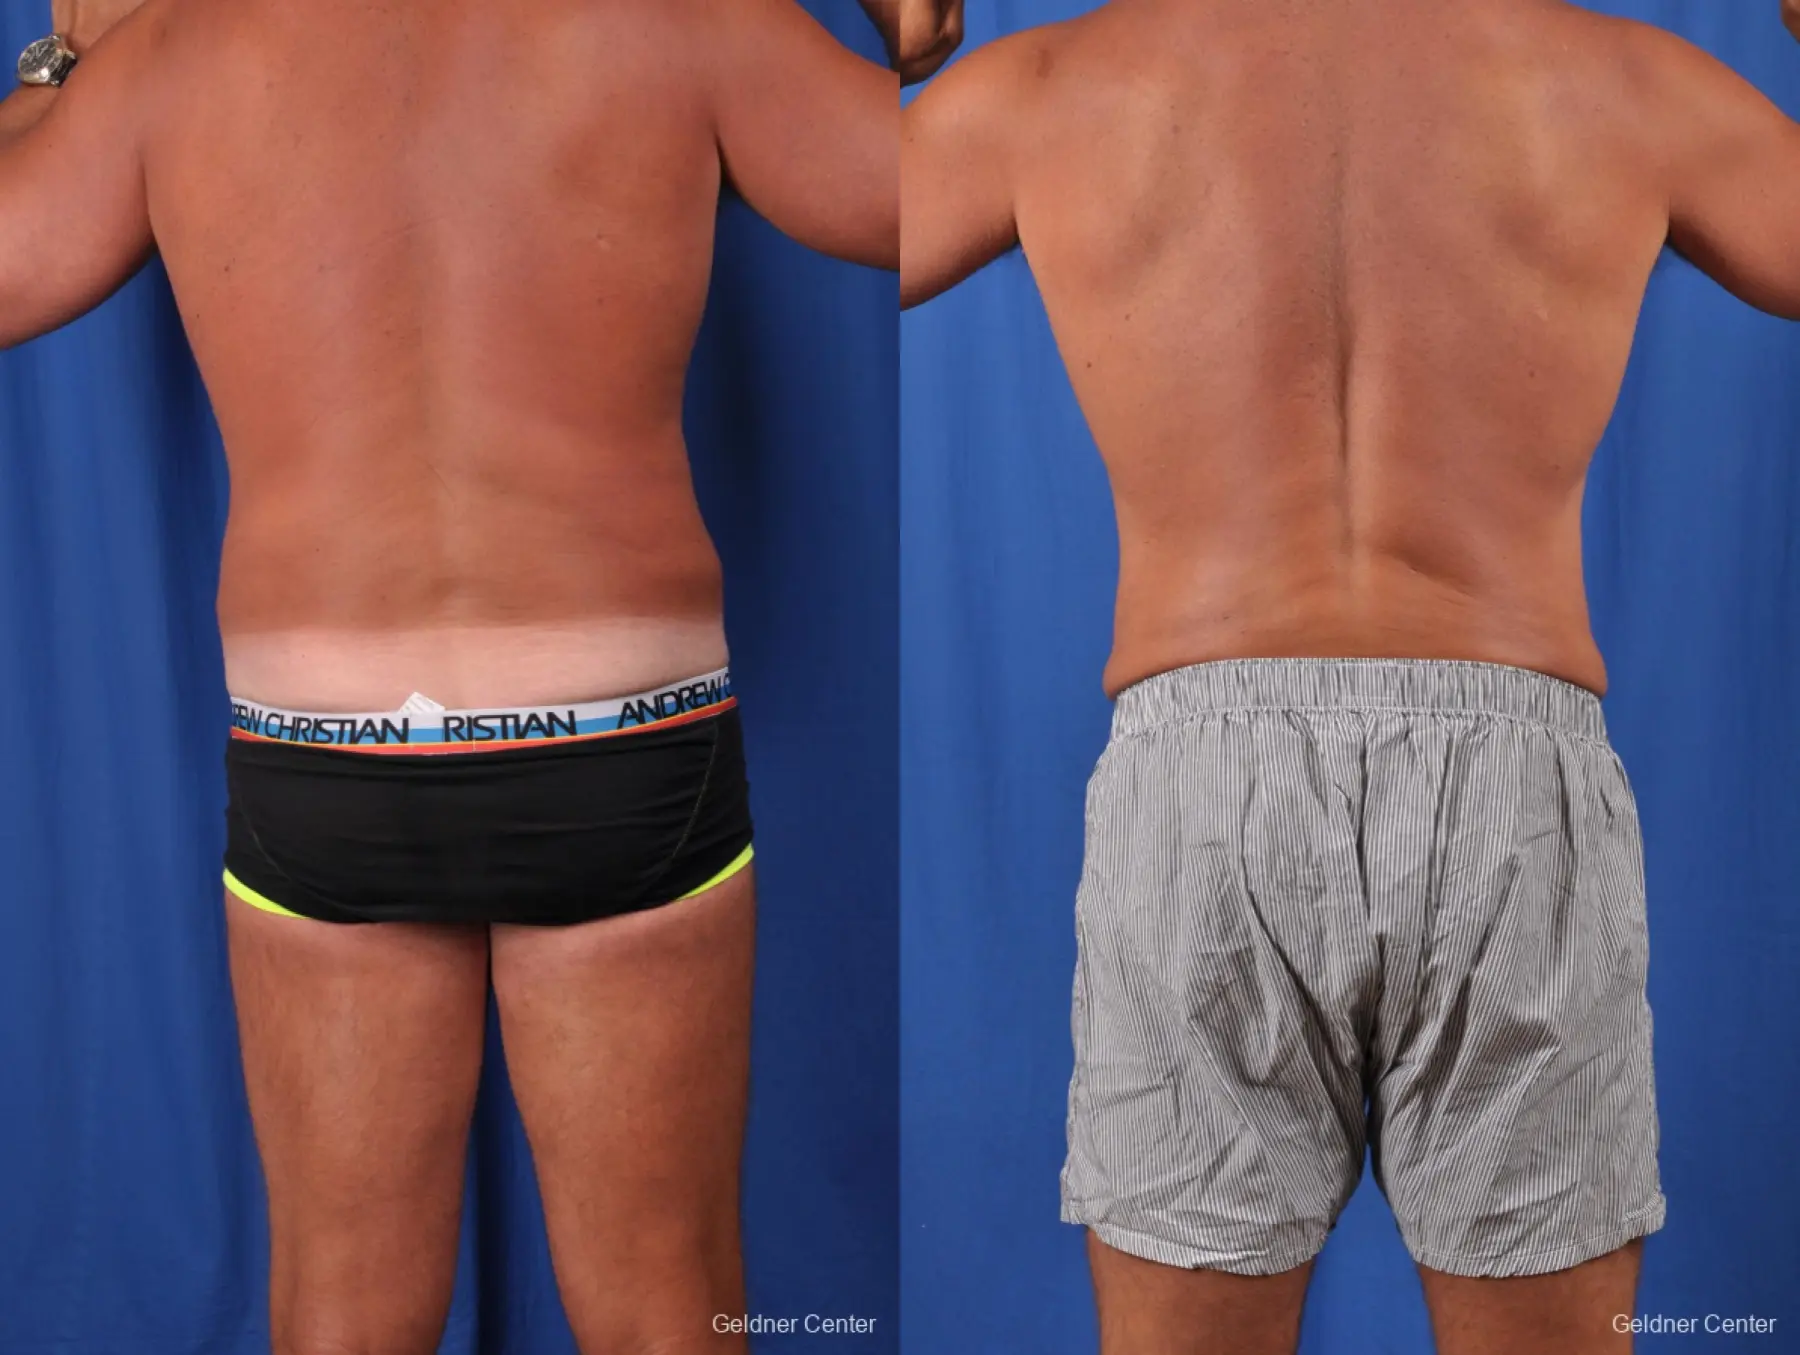 Liposuction For Men: Patient 5 - Before and After 4